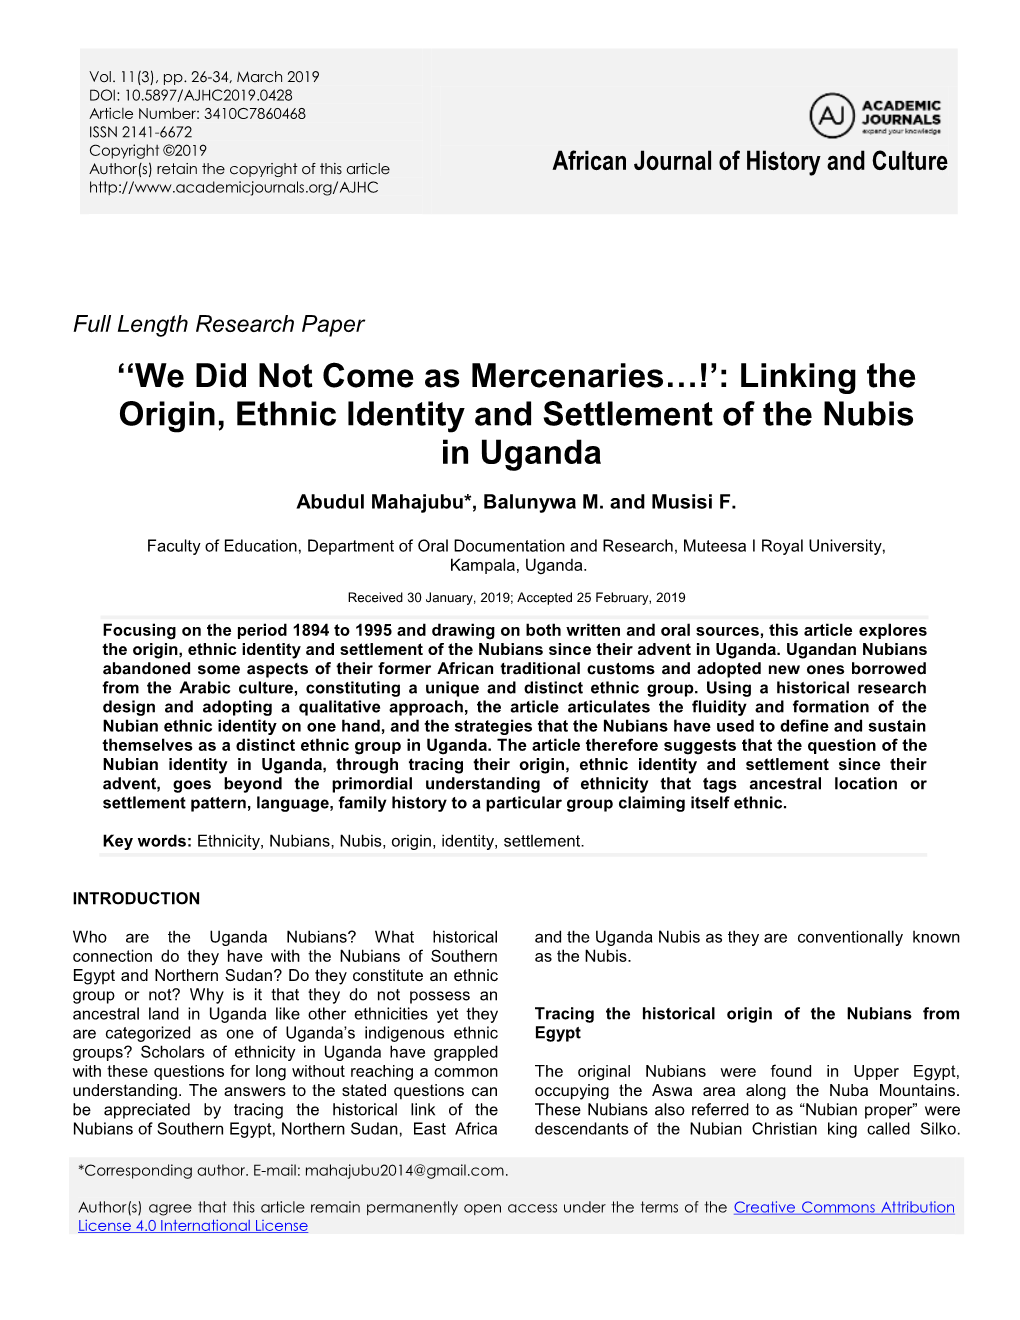 Linking the Origin, Ethnic Identity and Settlement of the Nubis in Uganda